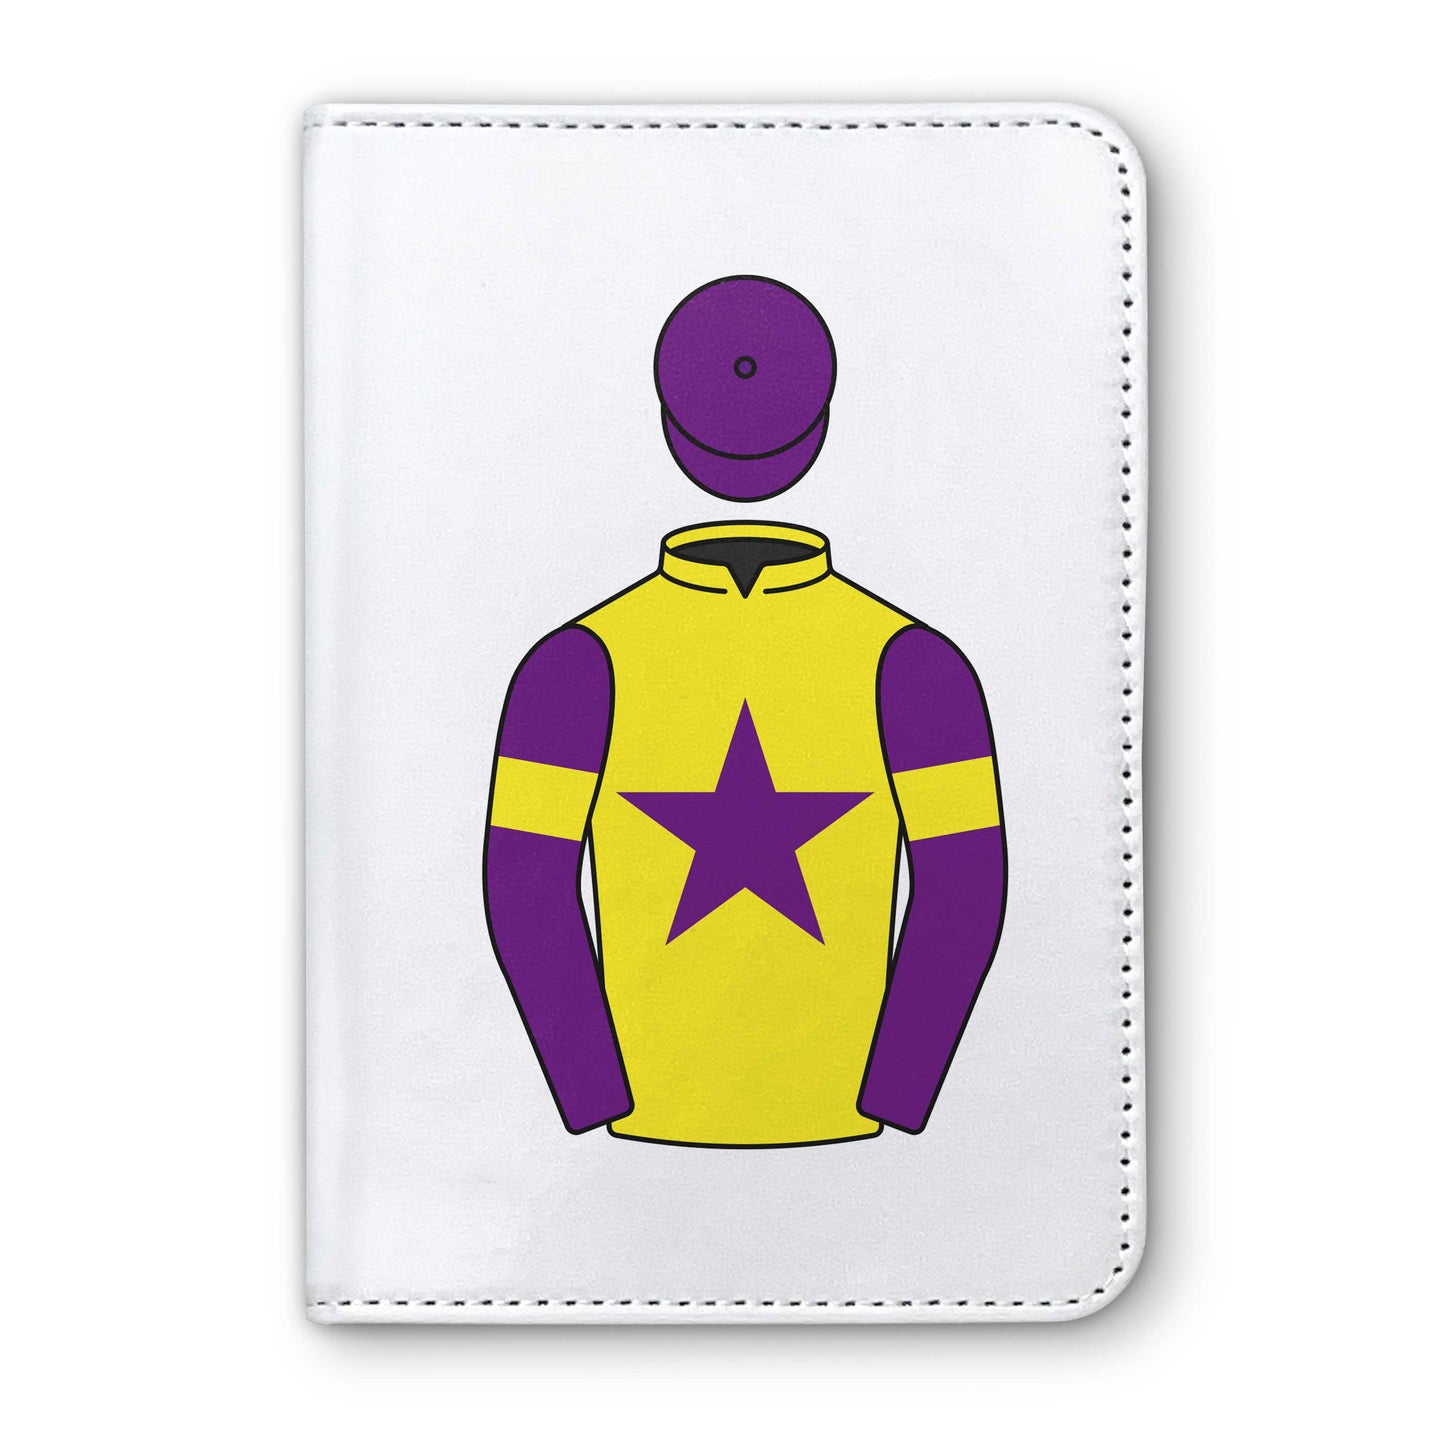 Will Roseff Horse Racing Passport Holder - Hacked Up Horse Racing Gifts